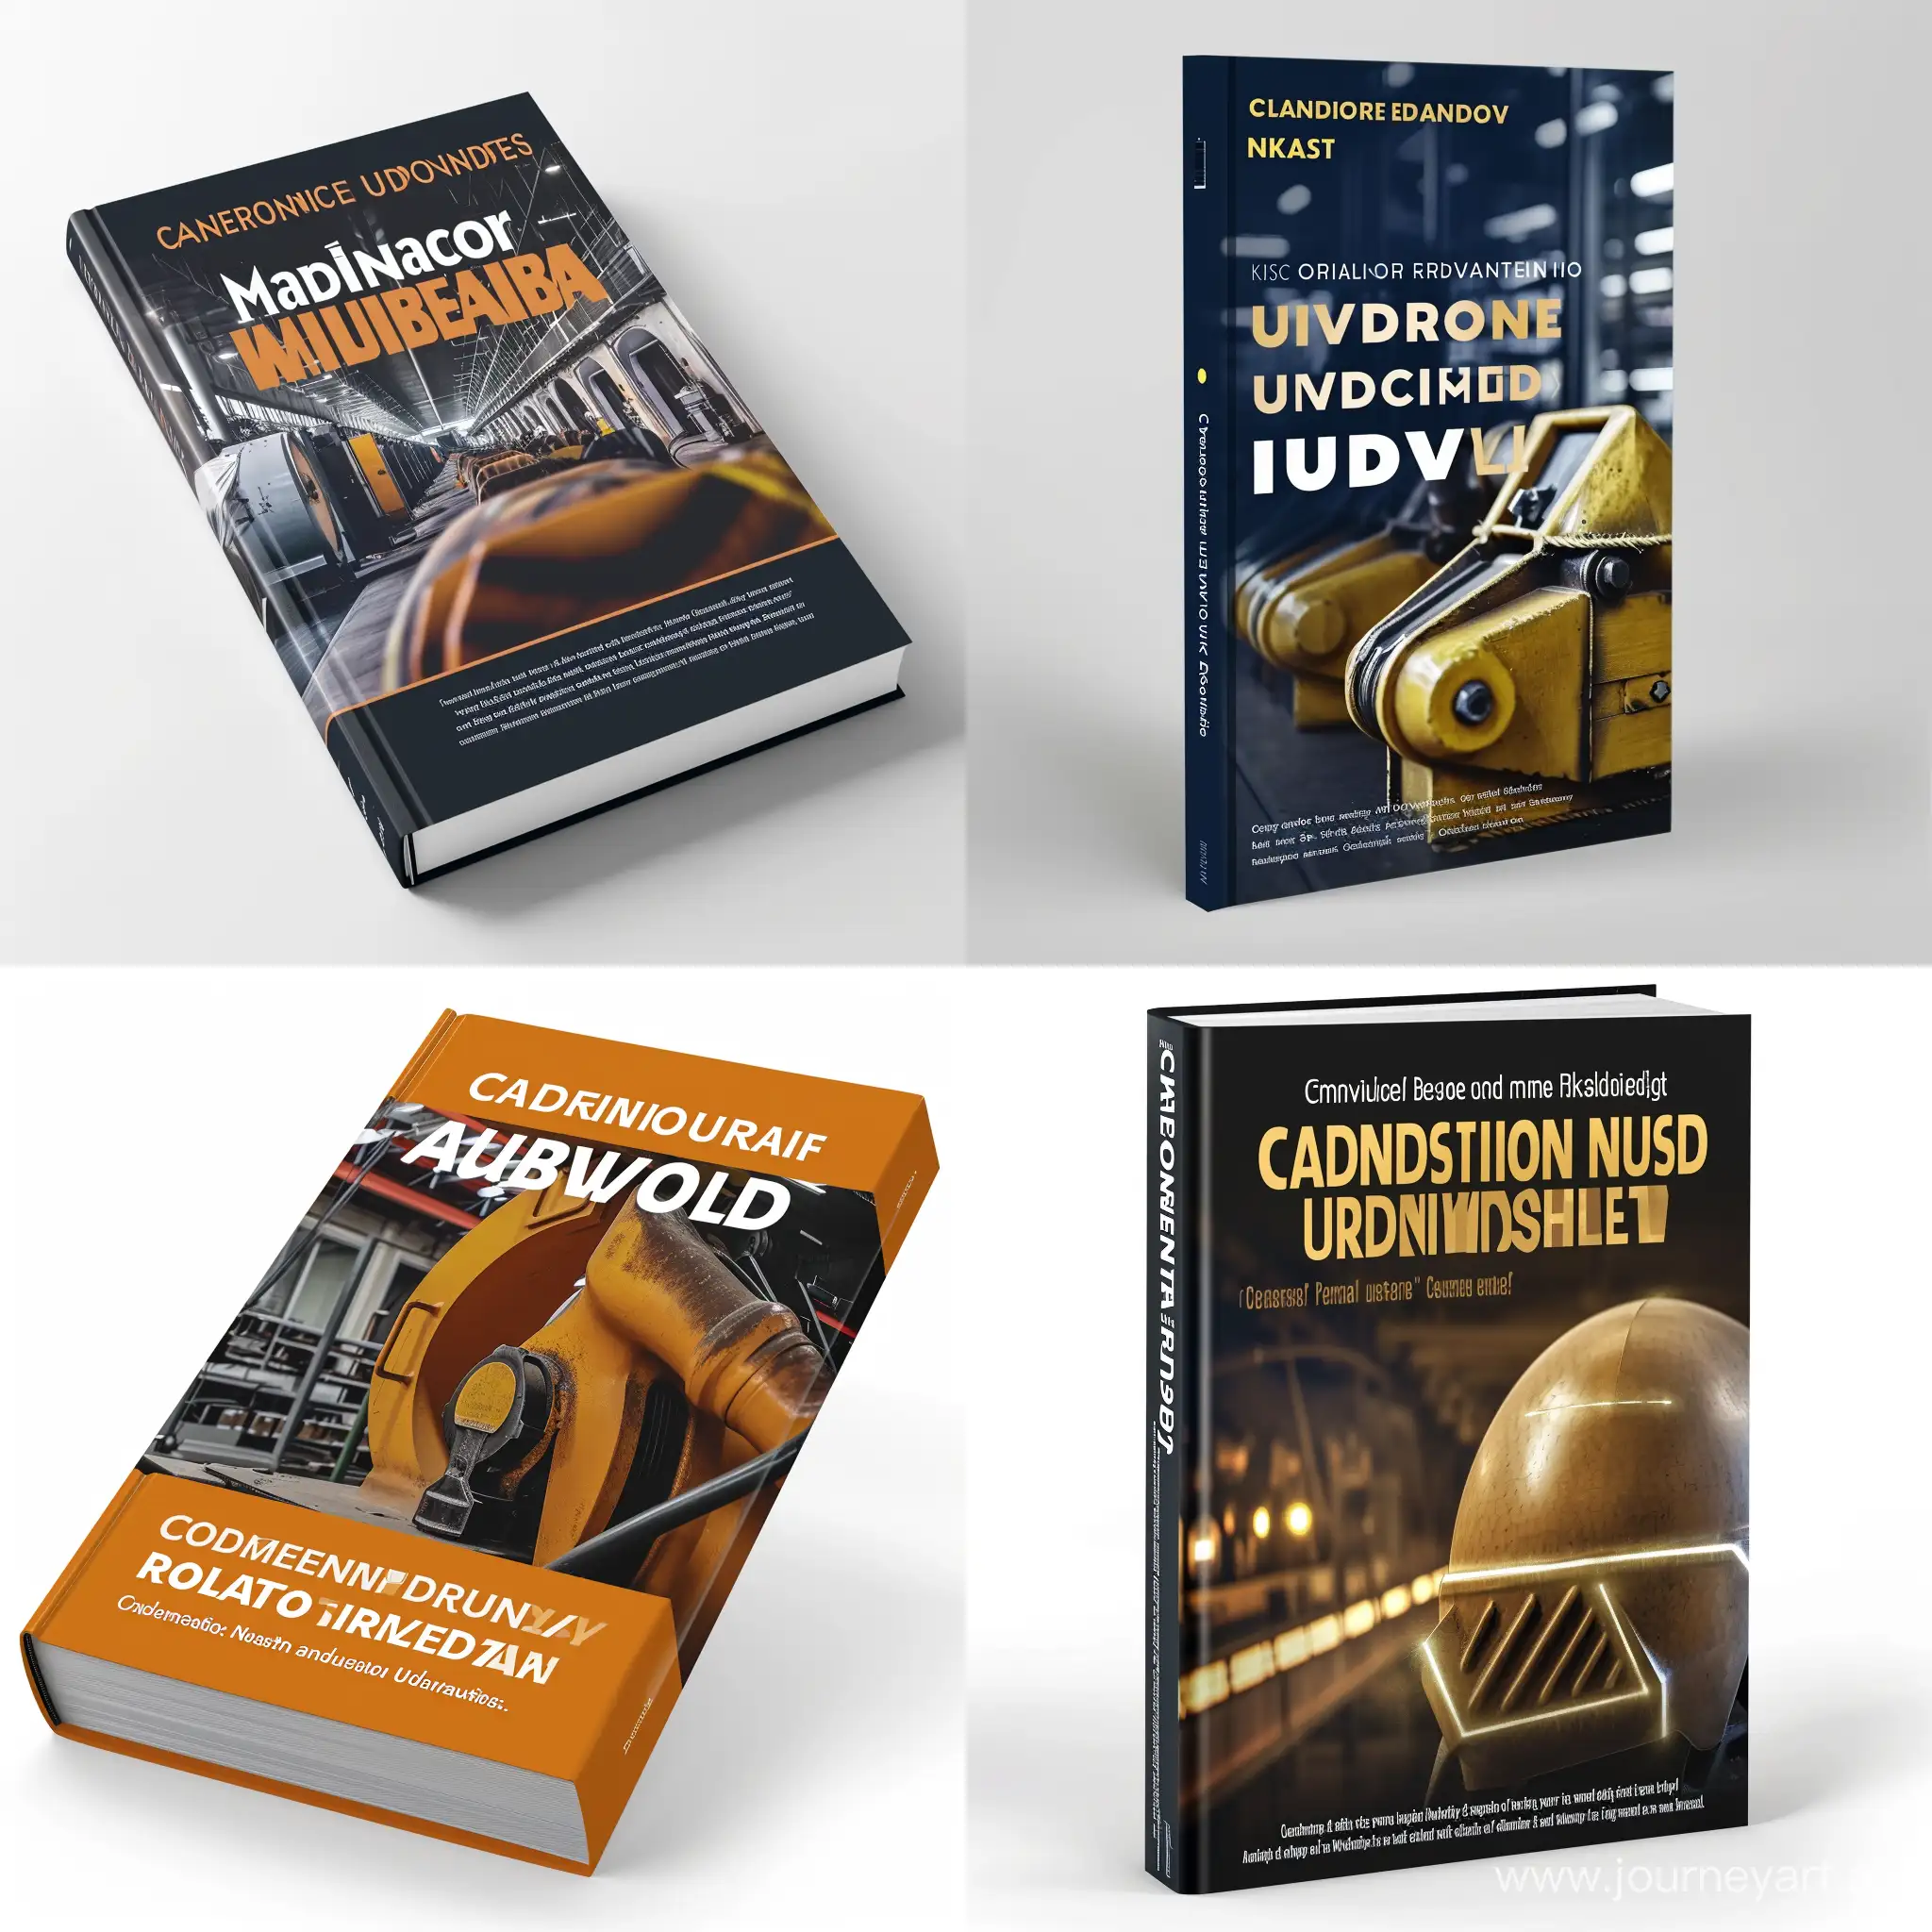 Comprehensive industry knowledge: A book cover for a guide on how to master your industry, with a catchy title and a relevant image.